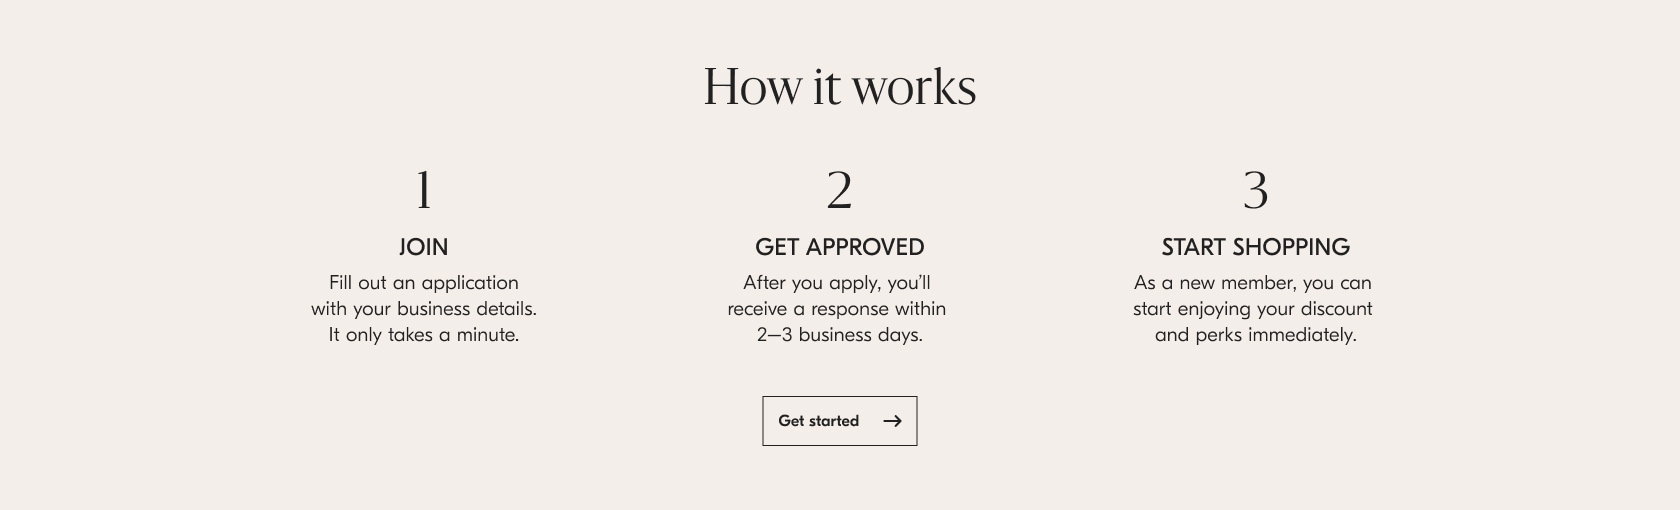 How it works: join, get approved, start shopping.